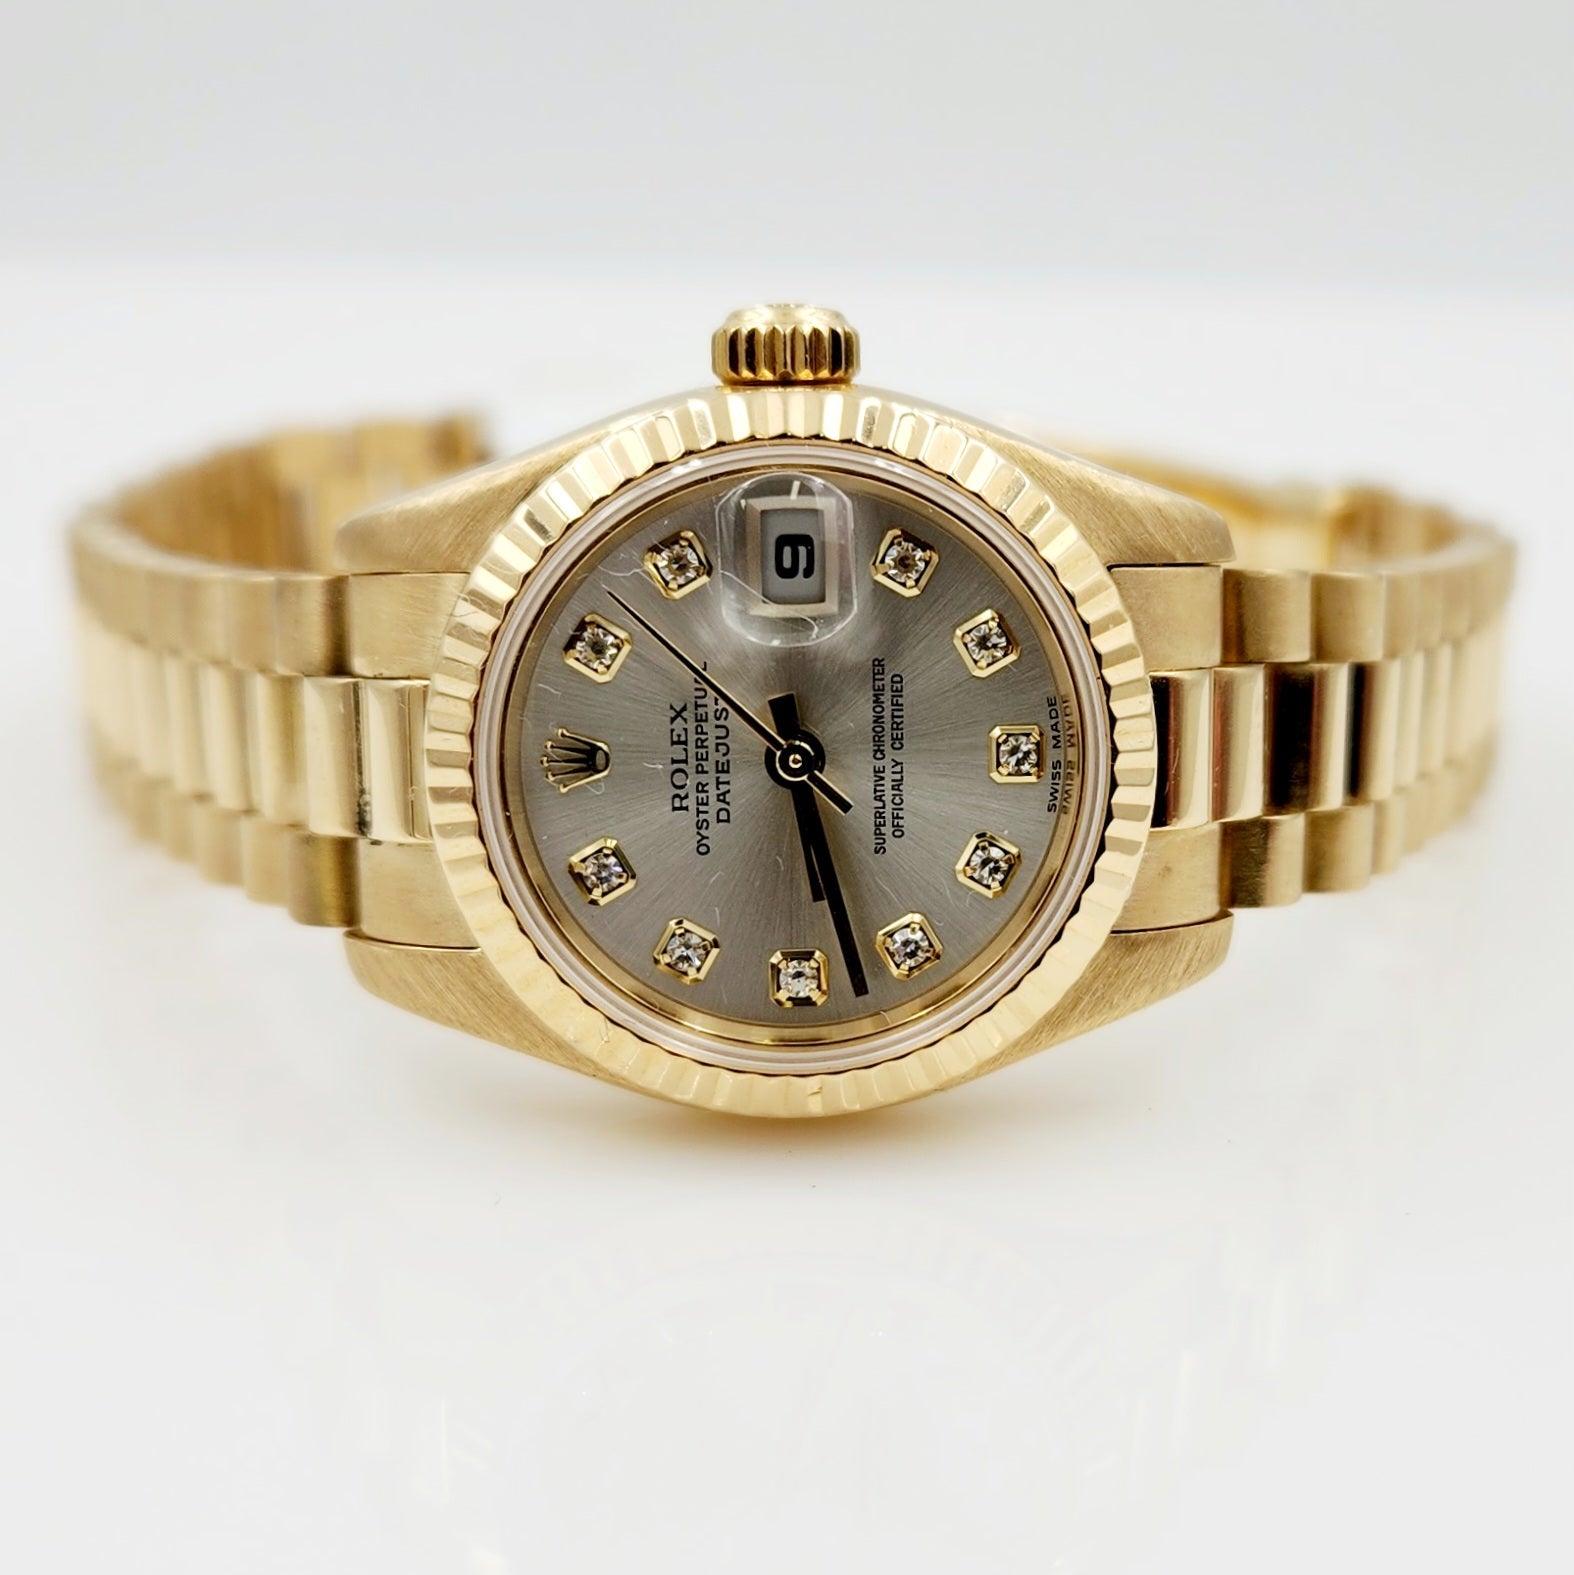 Ladies Rolex 26mm Presidential 18K Yellow Gold Watch with Silver Diamond Dial and Fluted Bezel. (Pre-Owned)